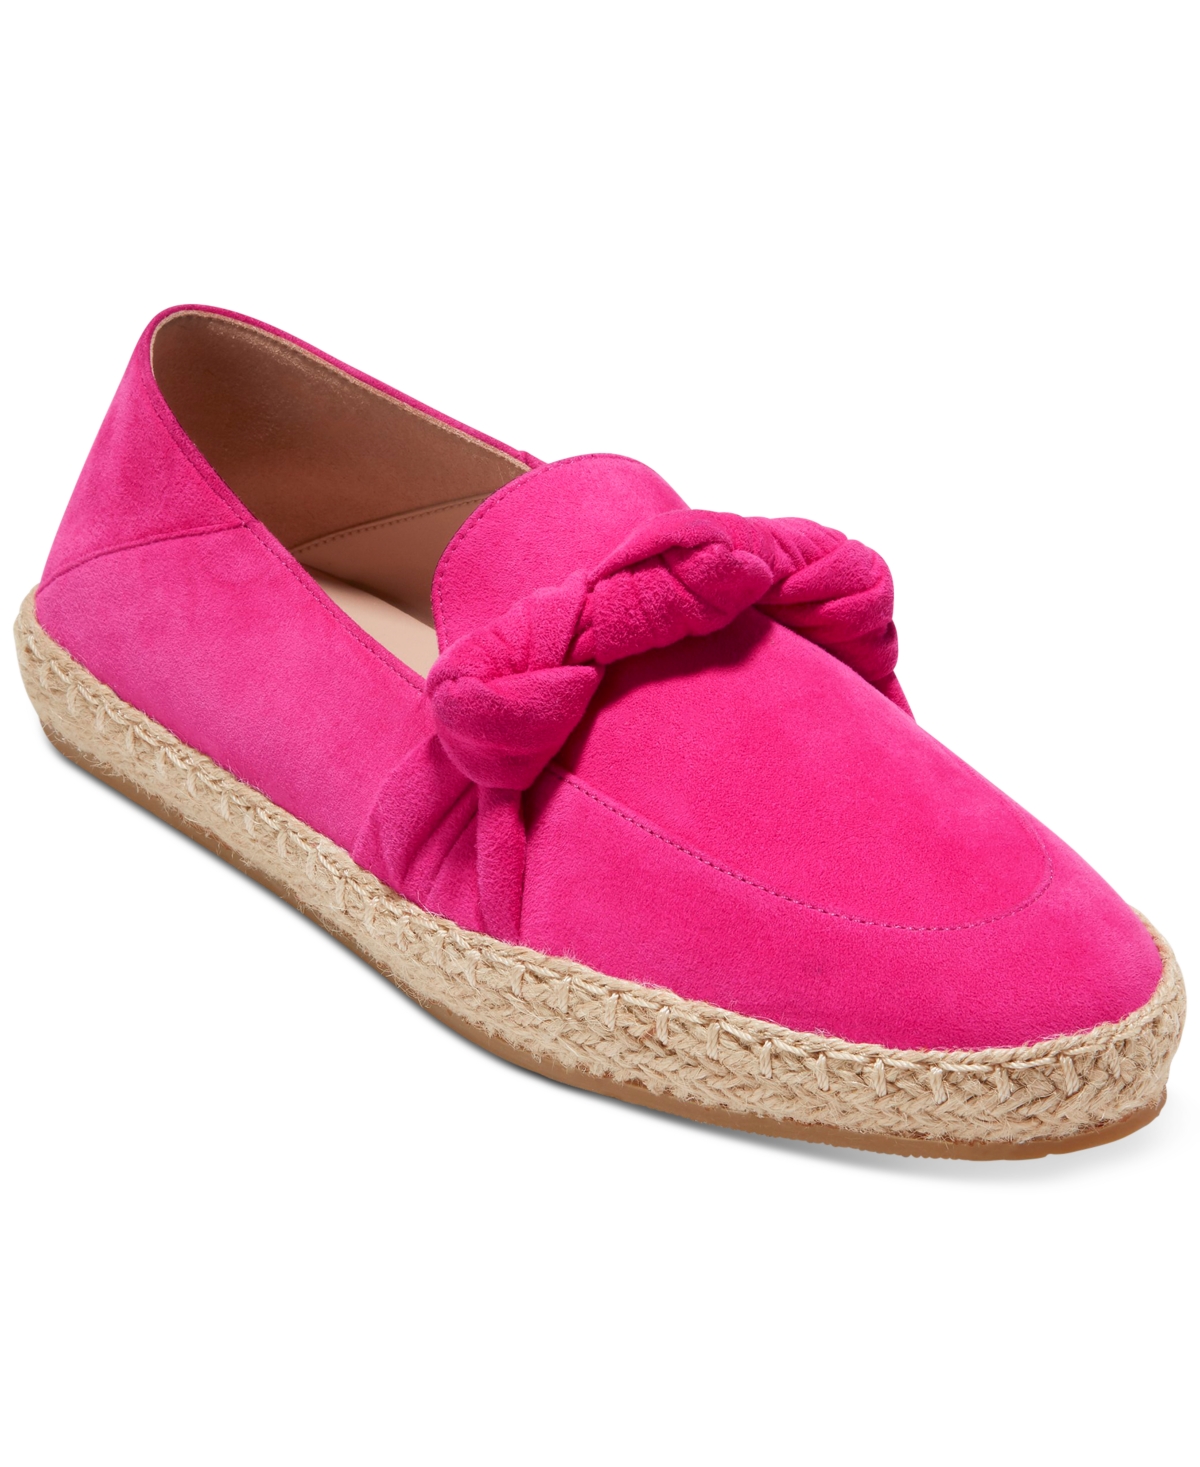 COLE HAAN WOMEN'S CLOUDFEEL KNOTTED ESPADRILLE FLATS